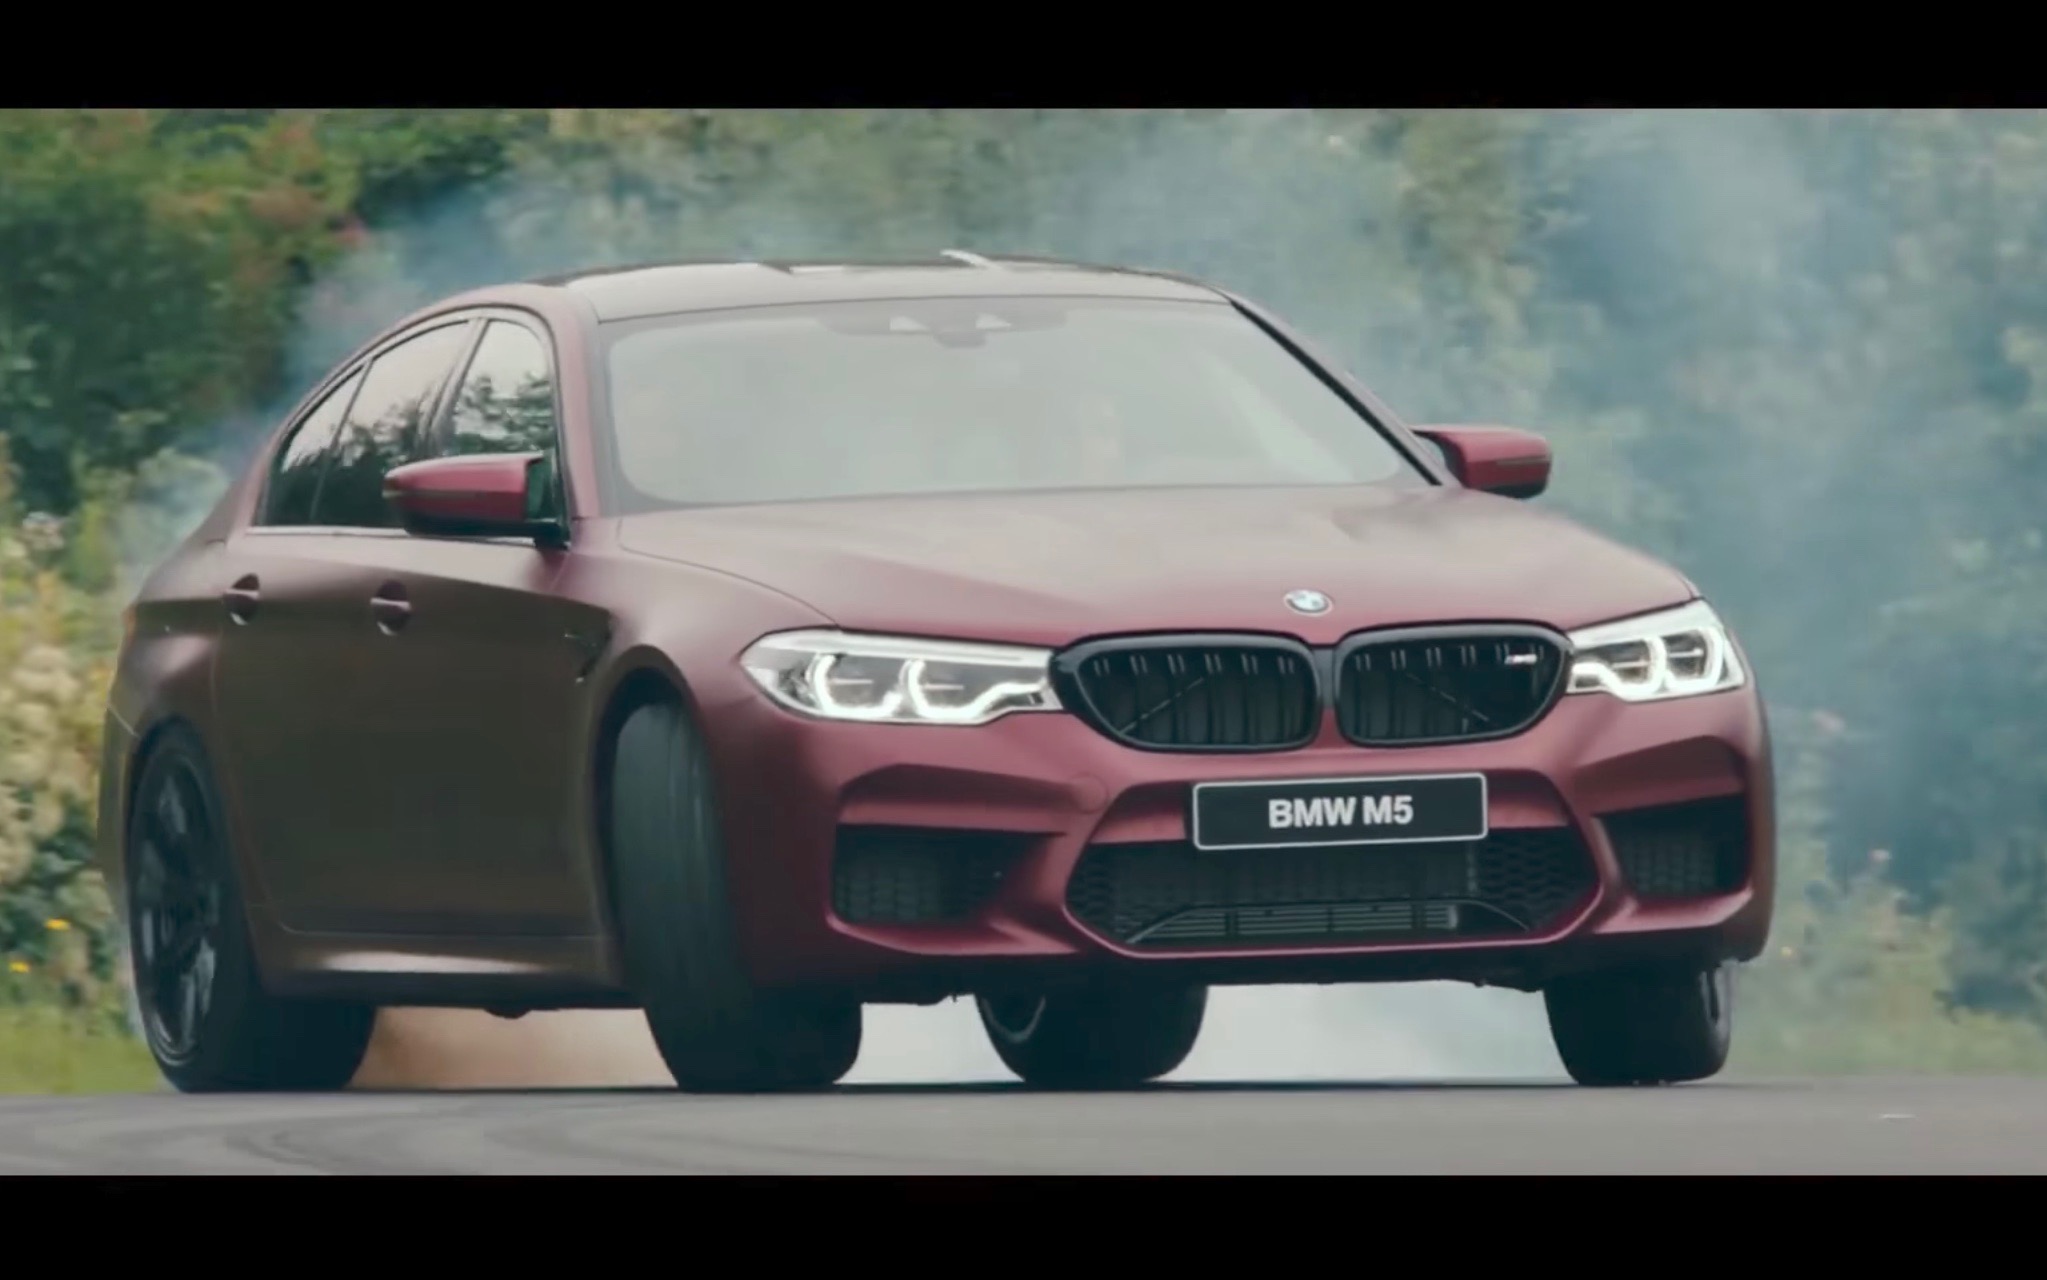 2018 BMW M5 showcased in Need for Speed Payback trailer (video)